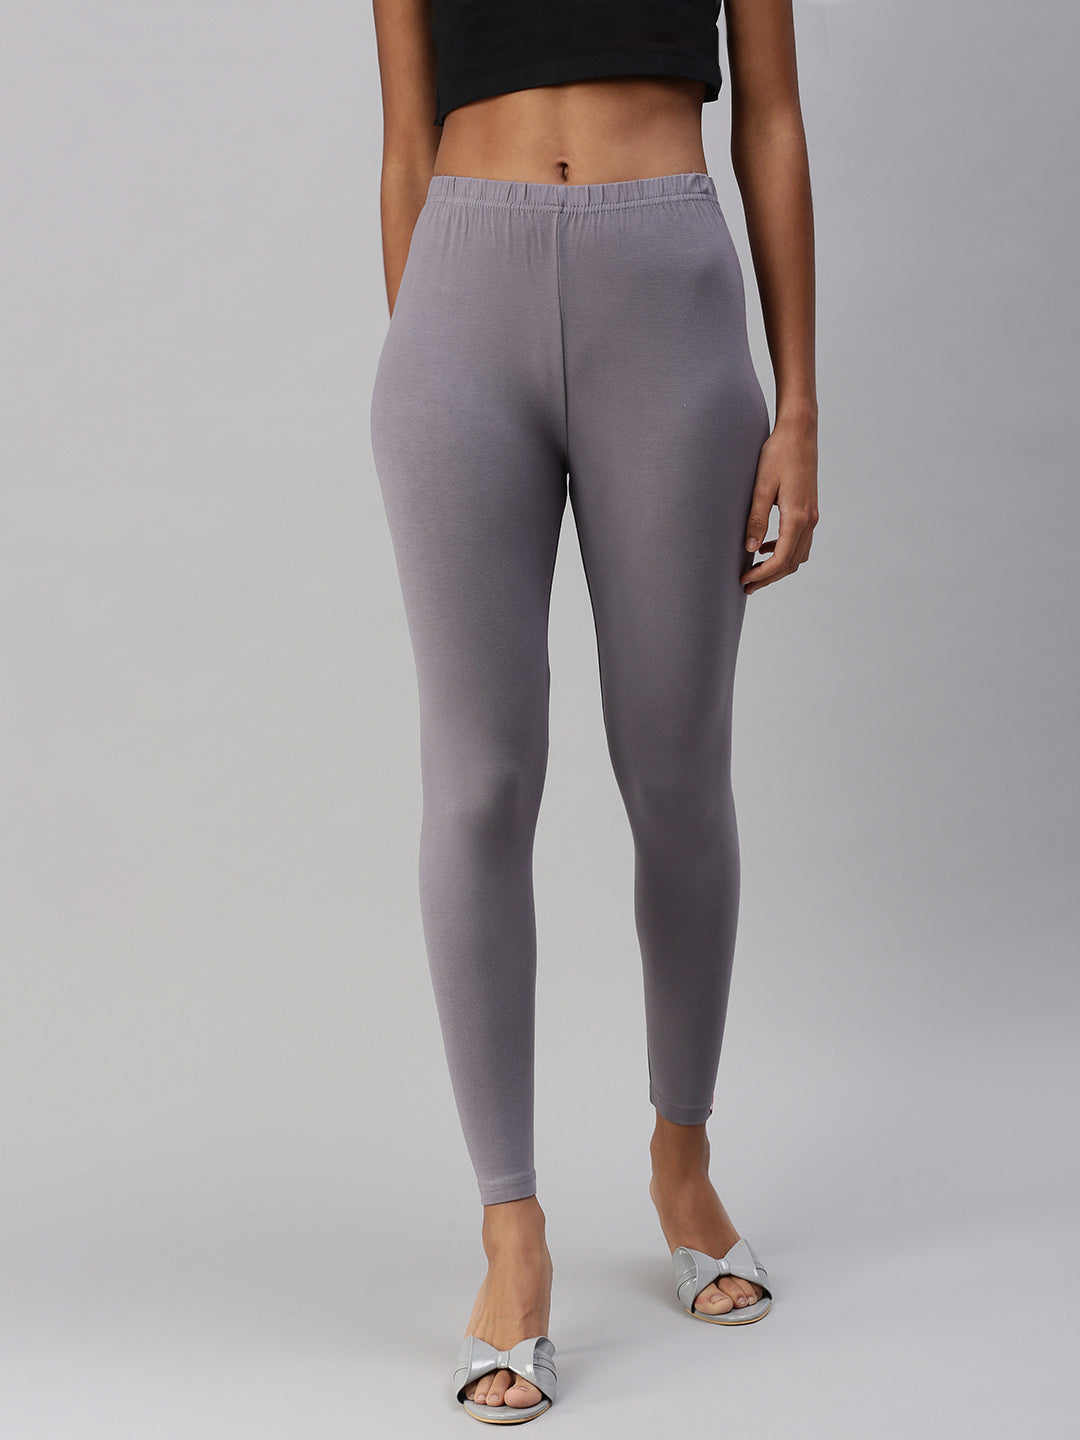 Shop Prisma's Grey Ankle Leggings for Comfortable Style